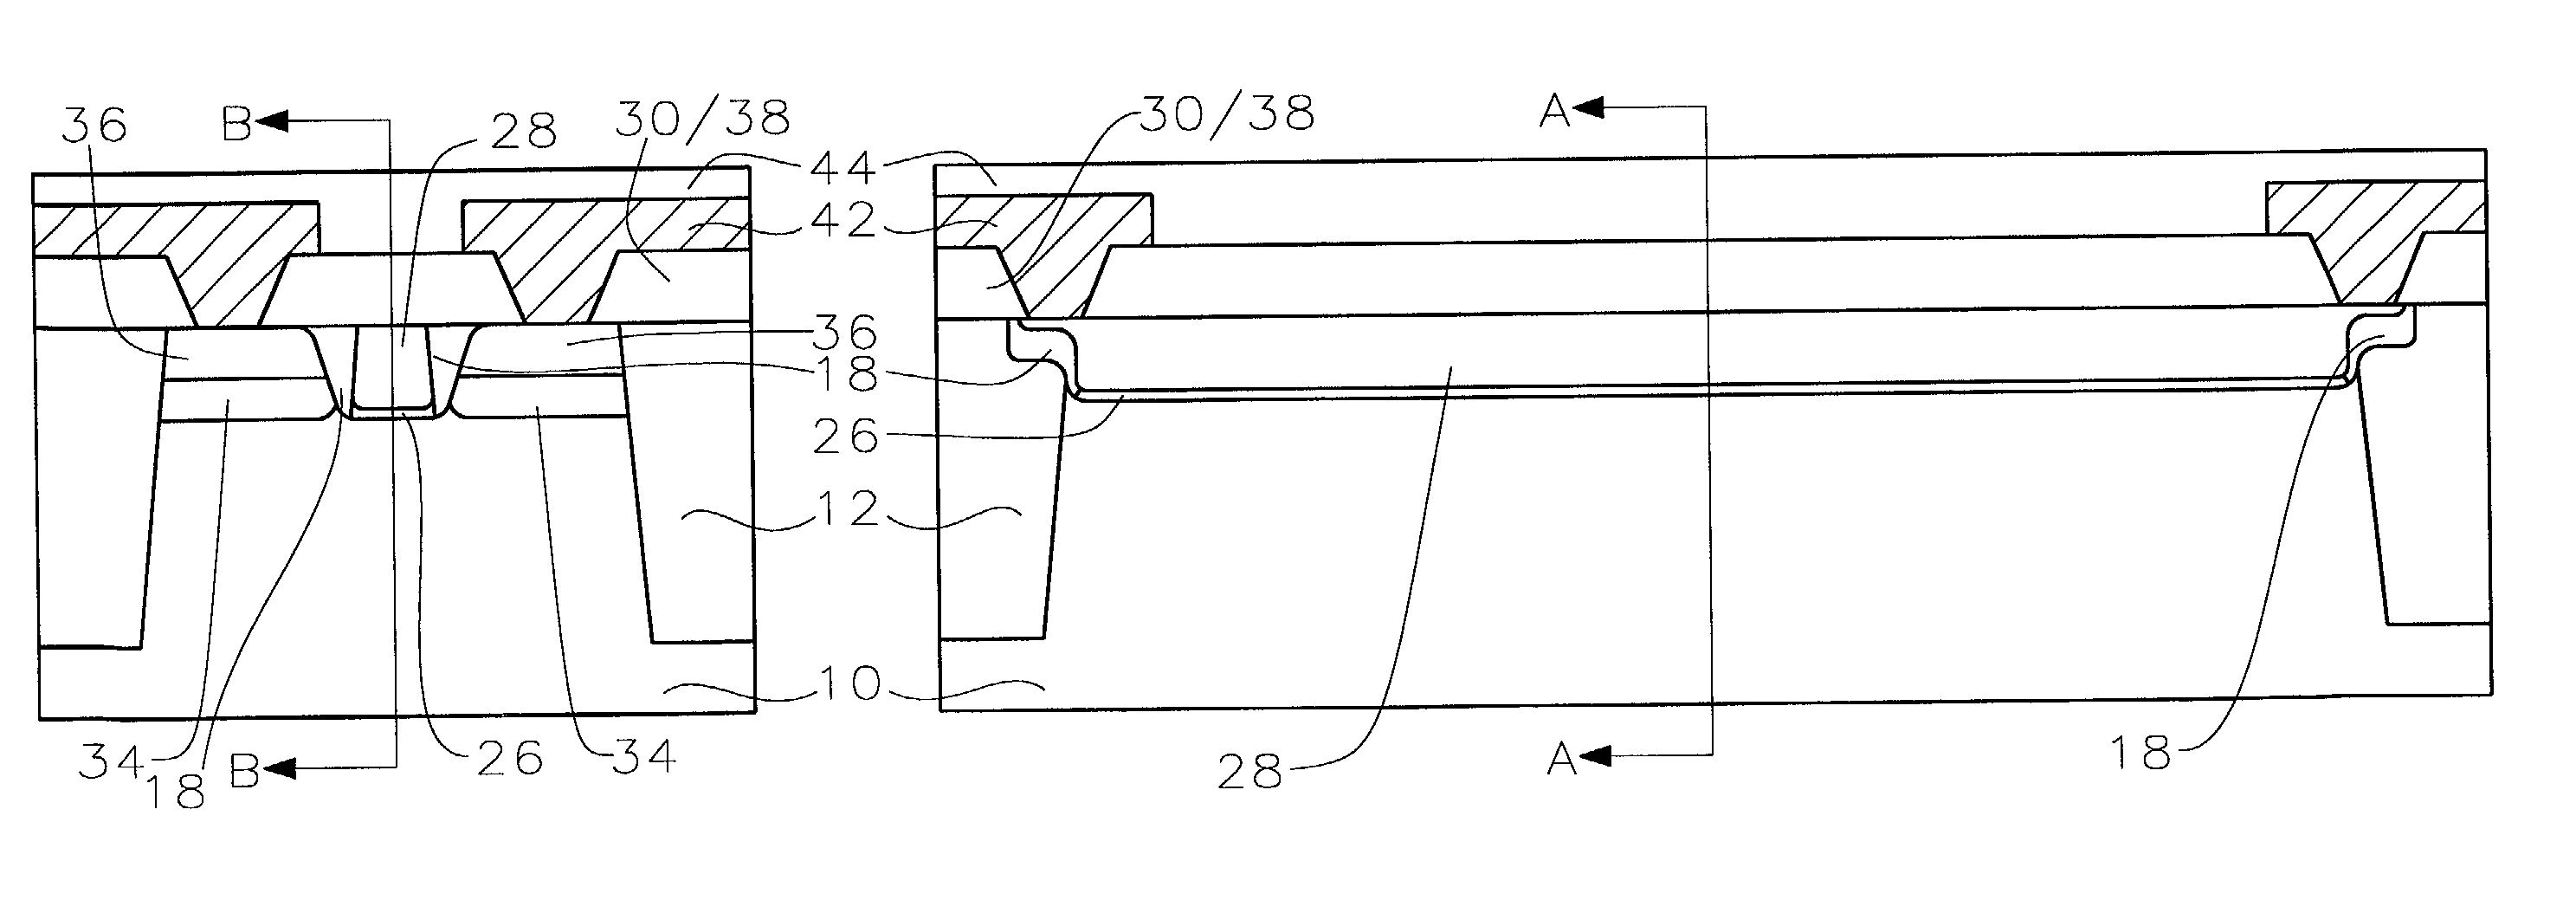 Process flow for a performance enhanced MOSFET with self-aligned, recessed channel